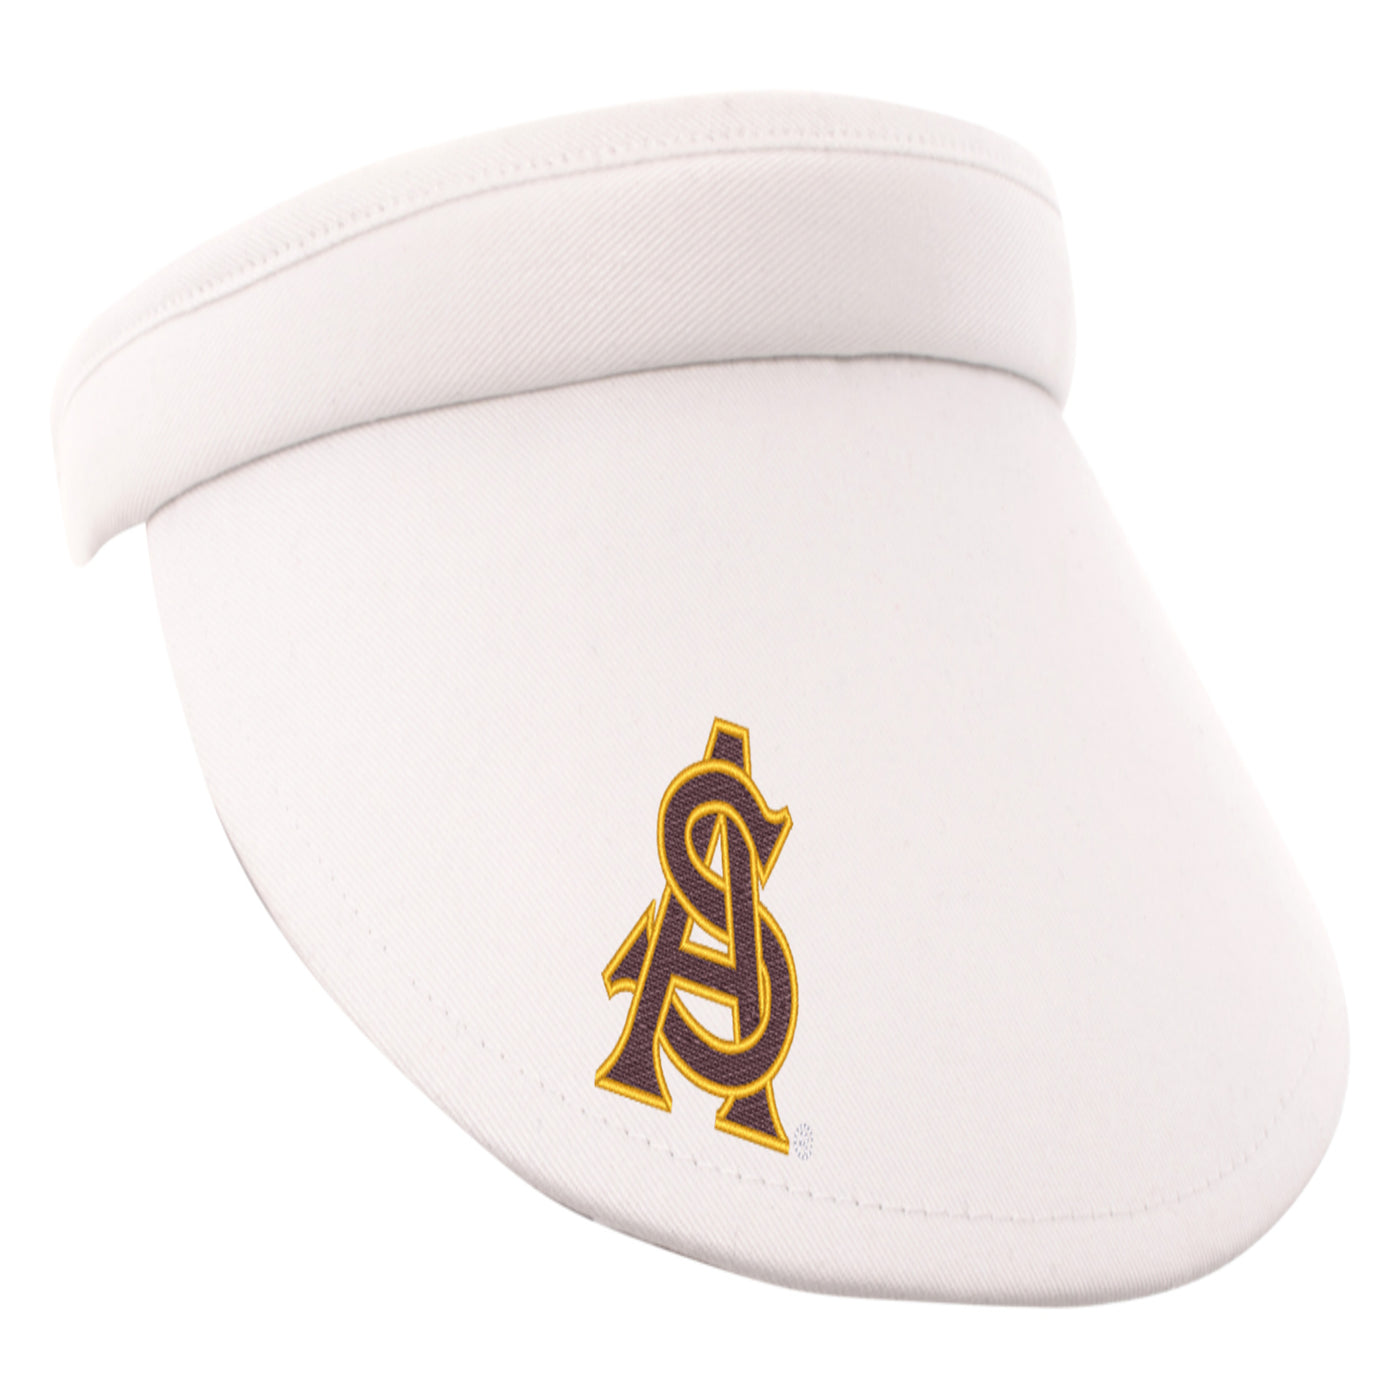 ASU white ladies visor with an interlocking A&S maroon and gold embroidered logo on the right bottom corner of the brim. 